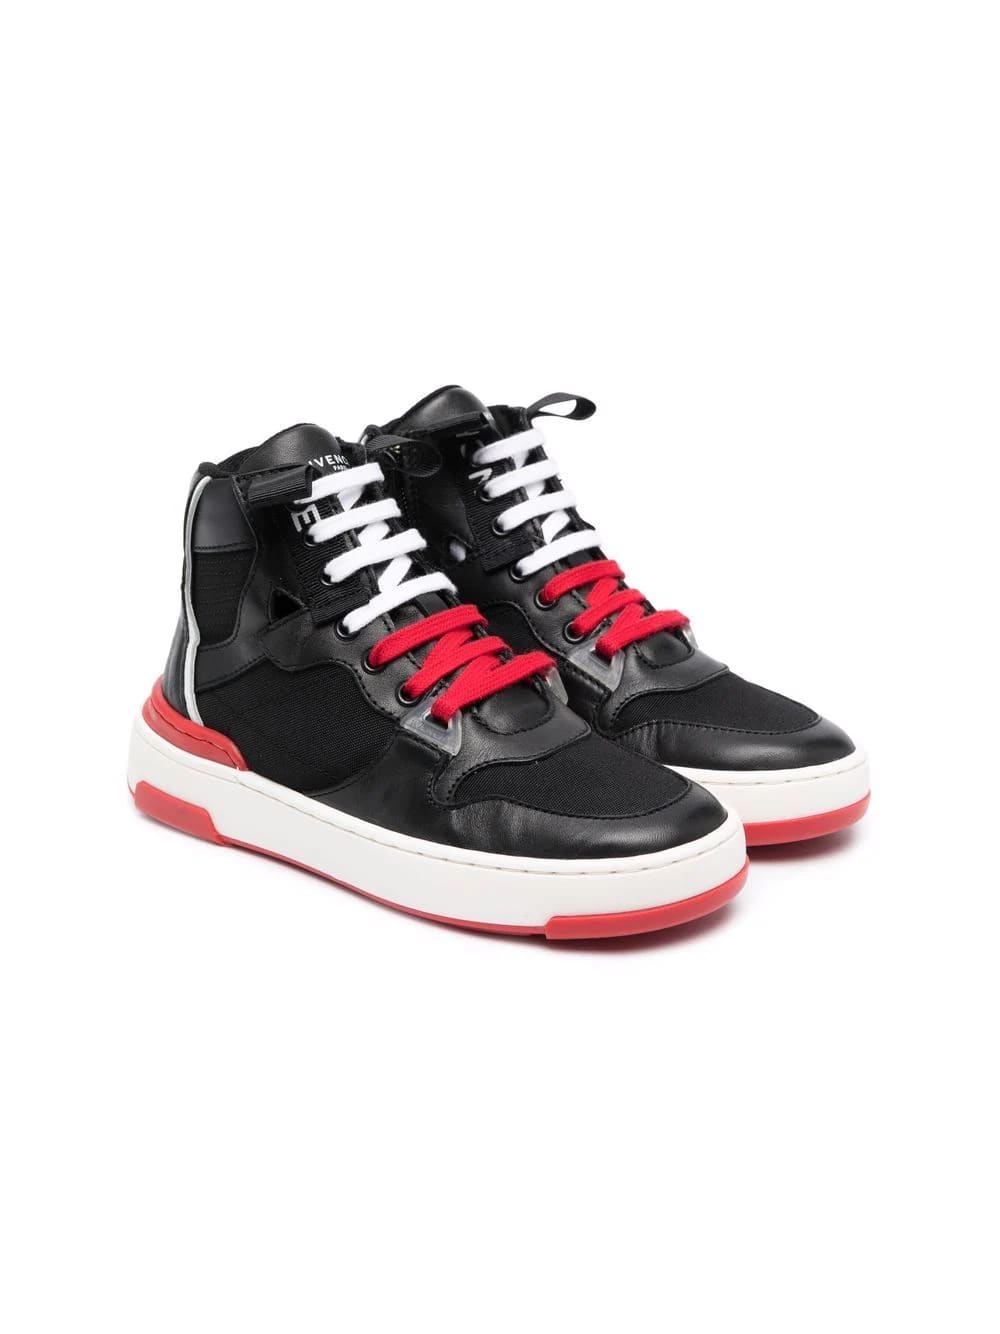 Givenchy Black Kids High Sneakers With Red And White Details